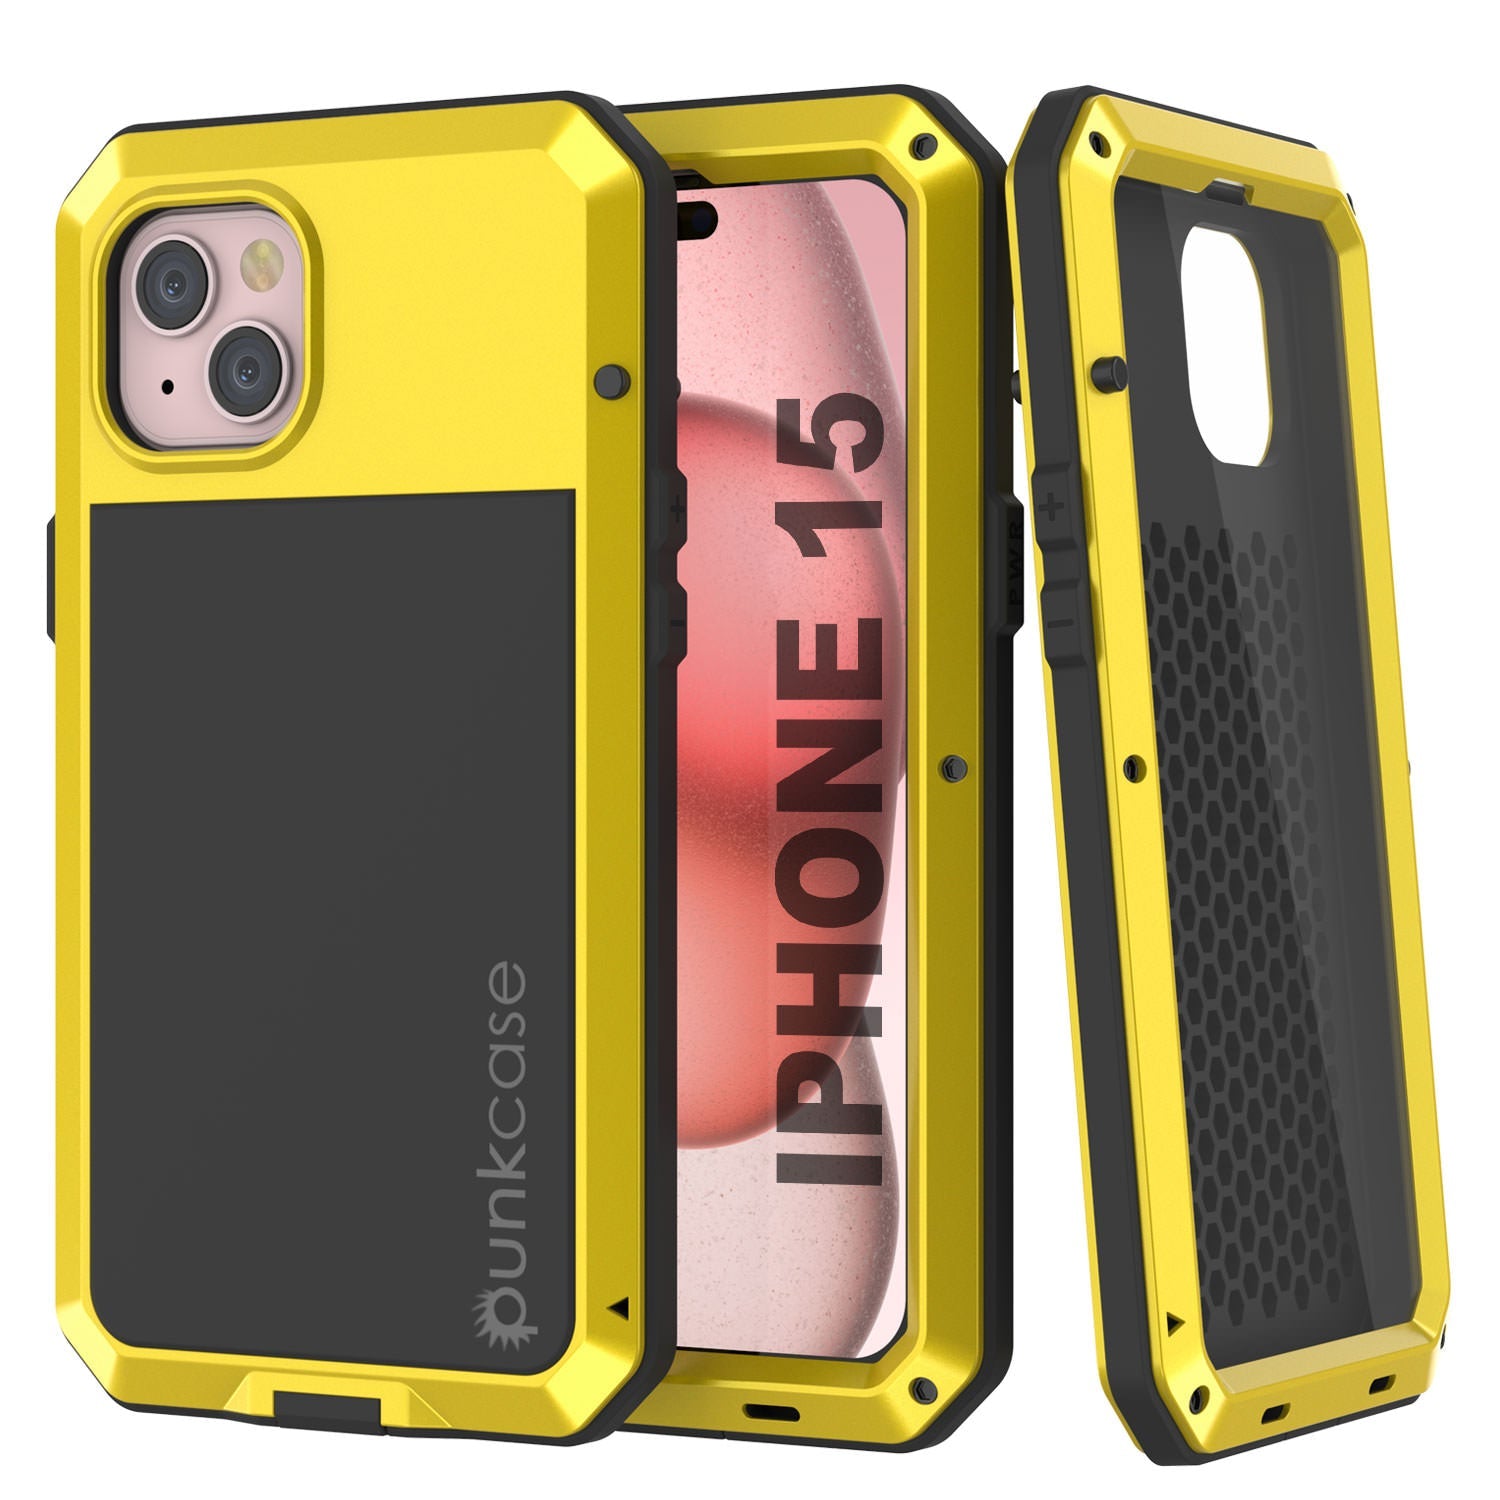 iPhone 15 Metal Case, Heavy Duty Military Grade Armor Cover [shock proof] Full Body Hard [Yellow]